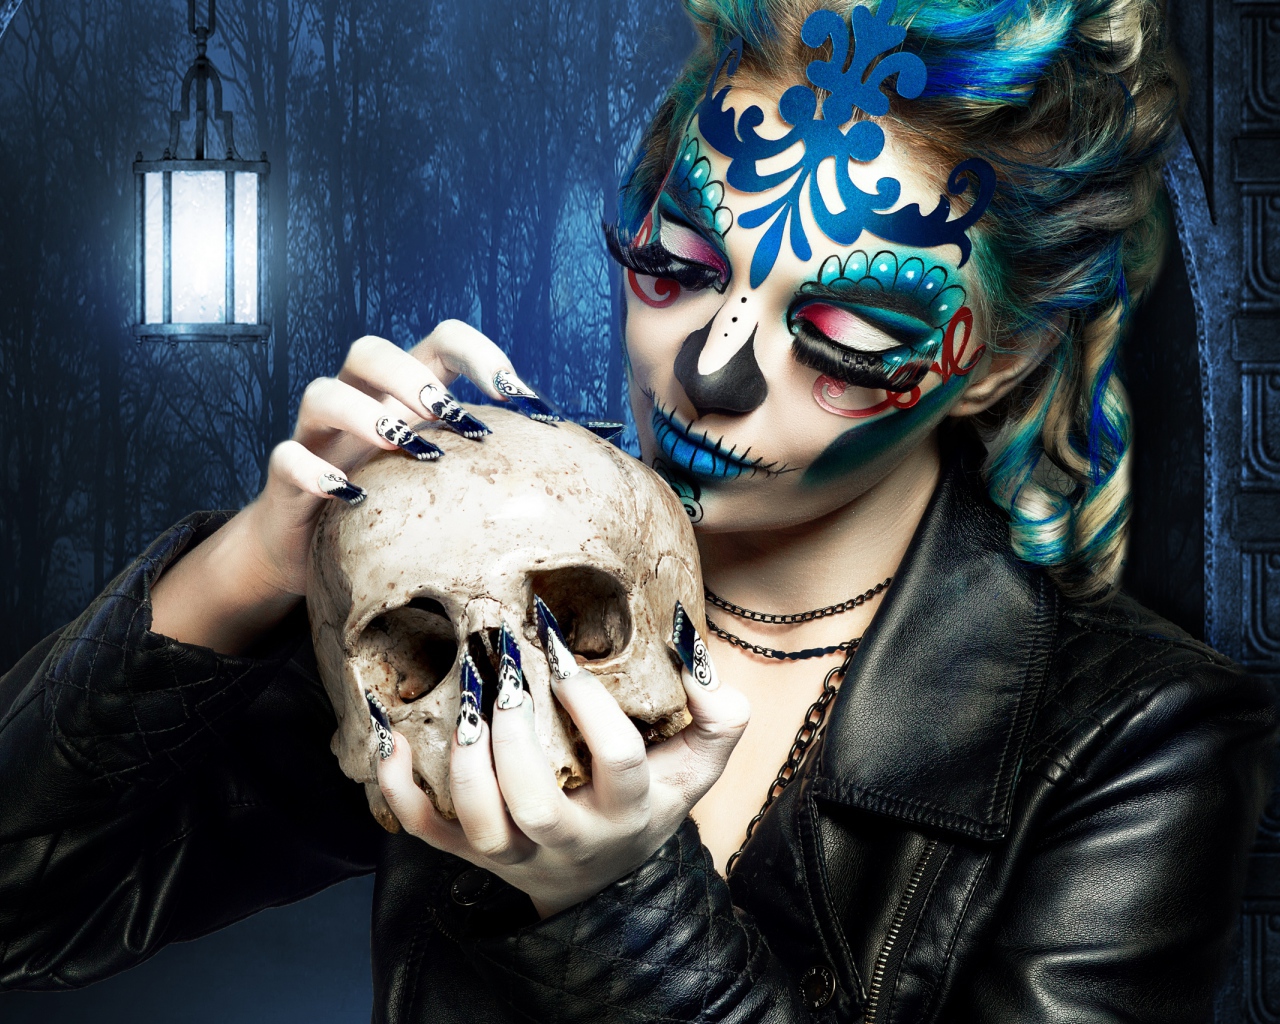 Girl with a make-up on the face with a skull in his hands on Halloween